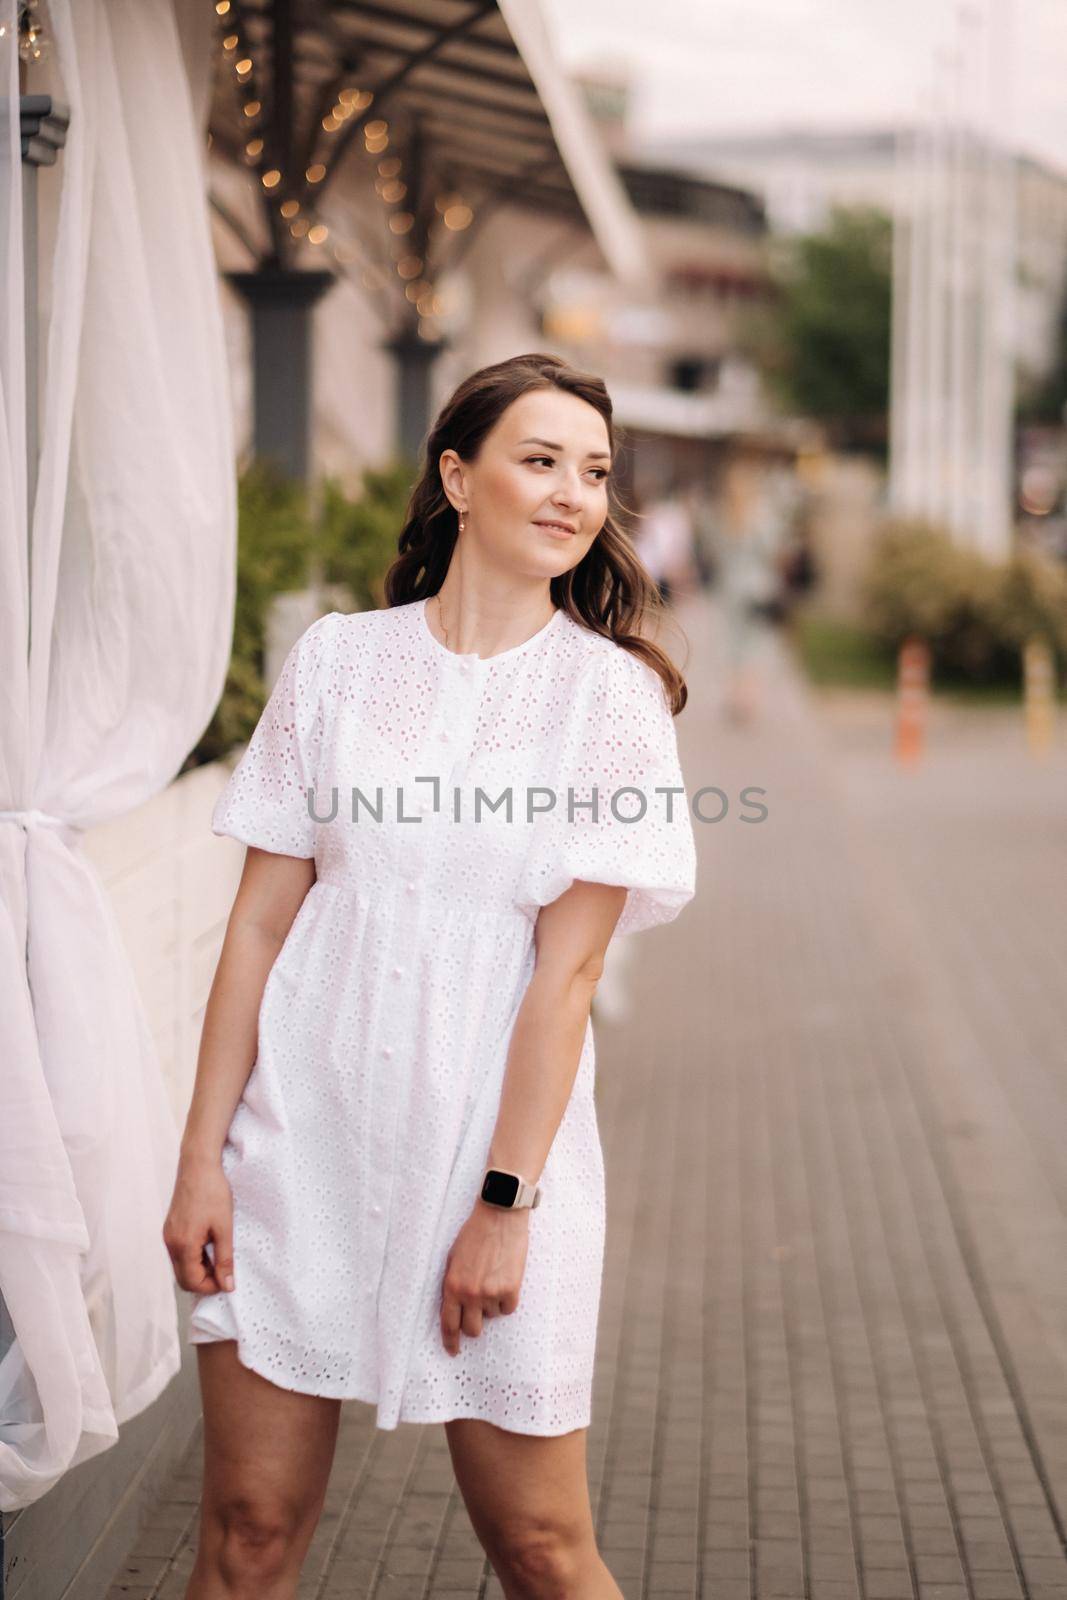 A beautiful woman in a white dress at sunset in the city. Evening street photography.